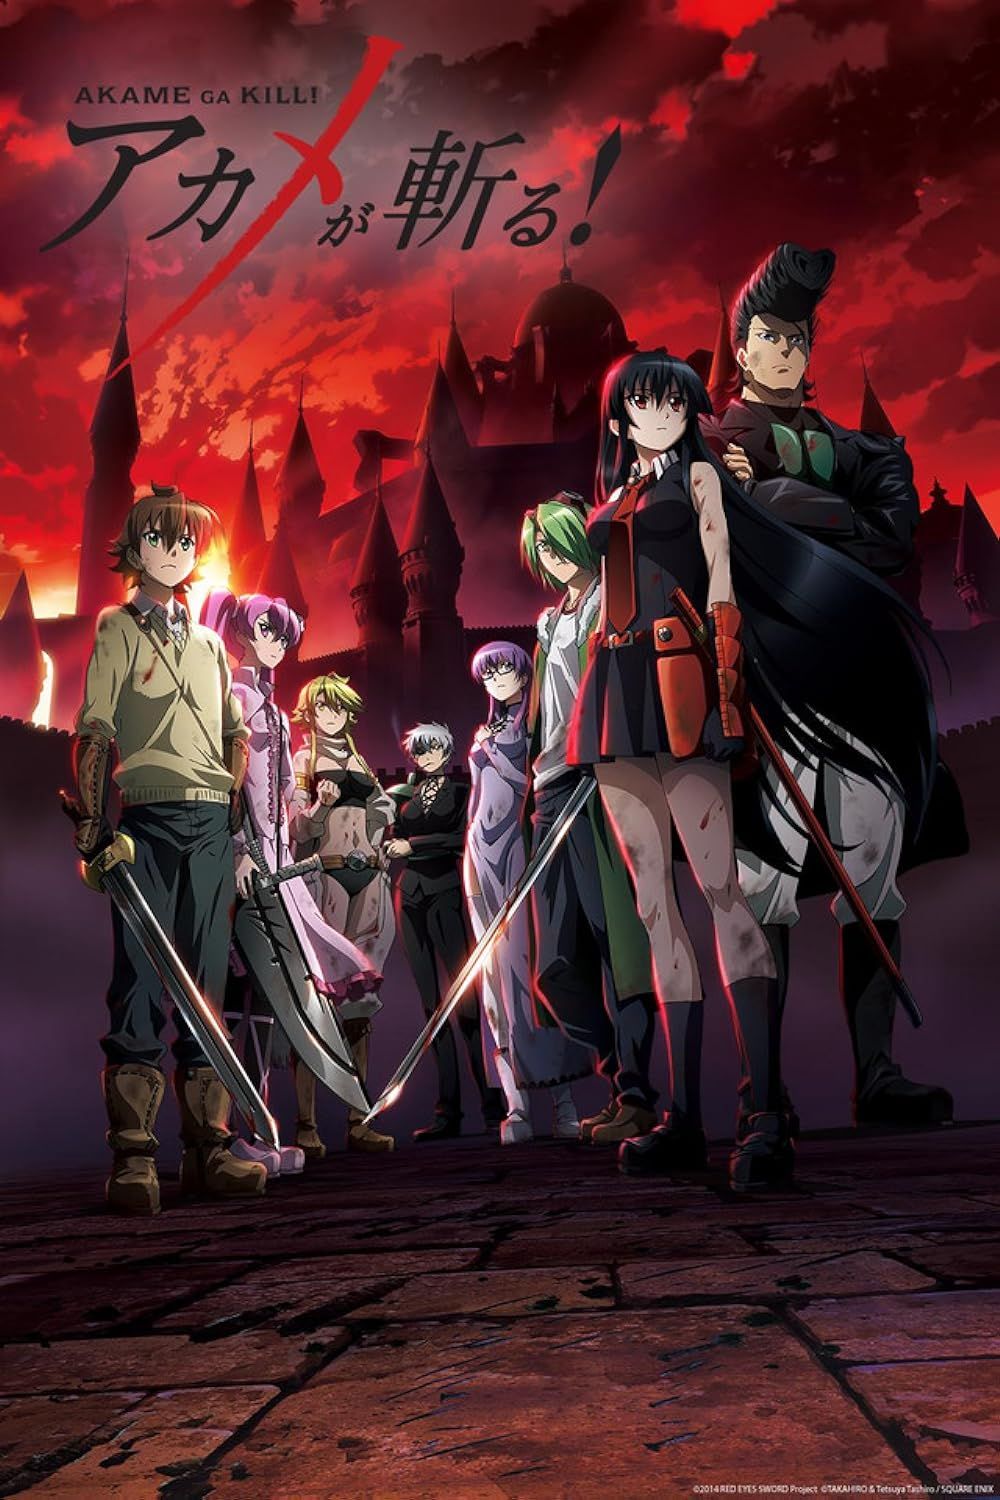 The main characters of Akame ga Kill on the poster